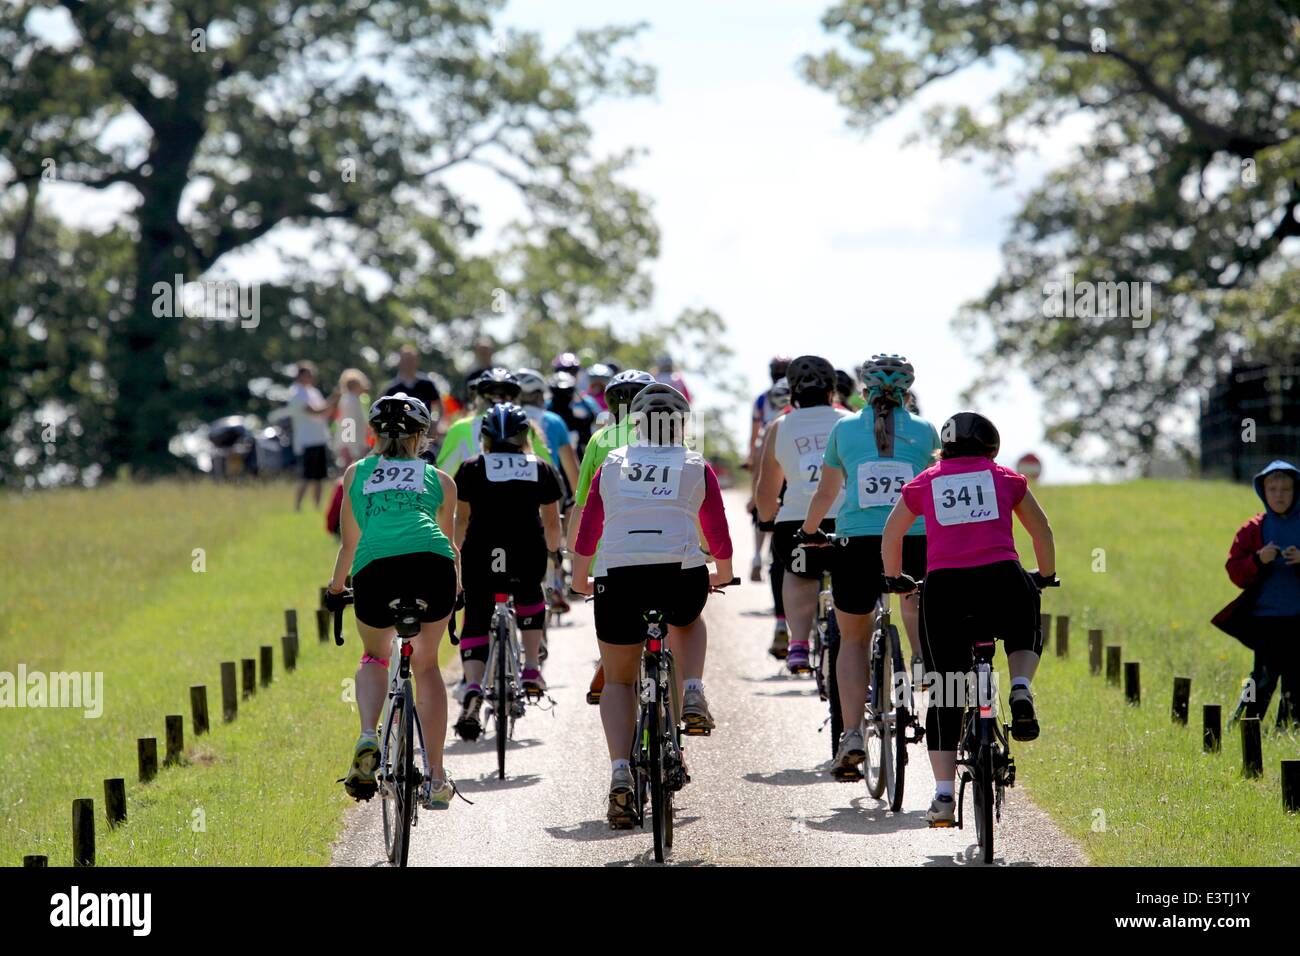 Woburn, Bedfordshire, UK. 29th June 2014. Cycletta Bedfordshire, a women only cycling event. Credit:  Neville Styles/Alamy Live News Stock Photo